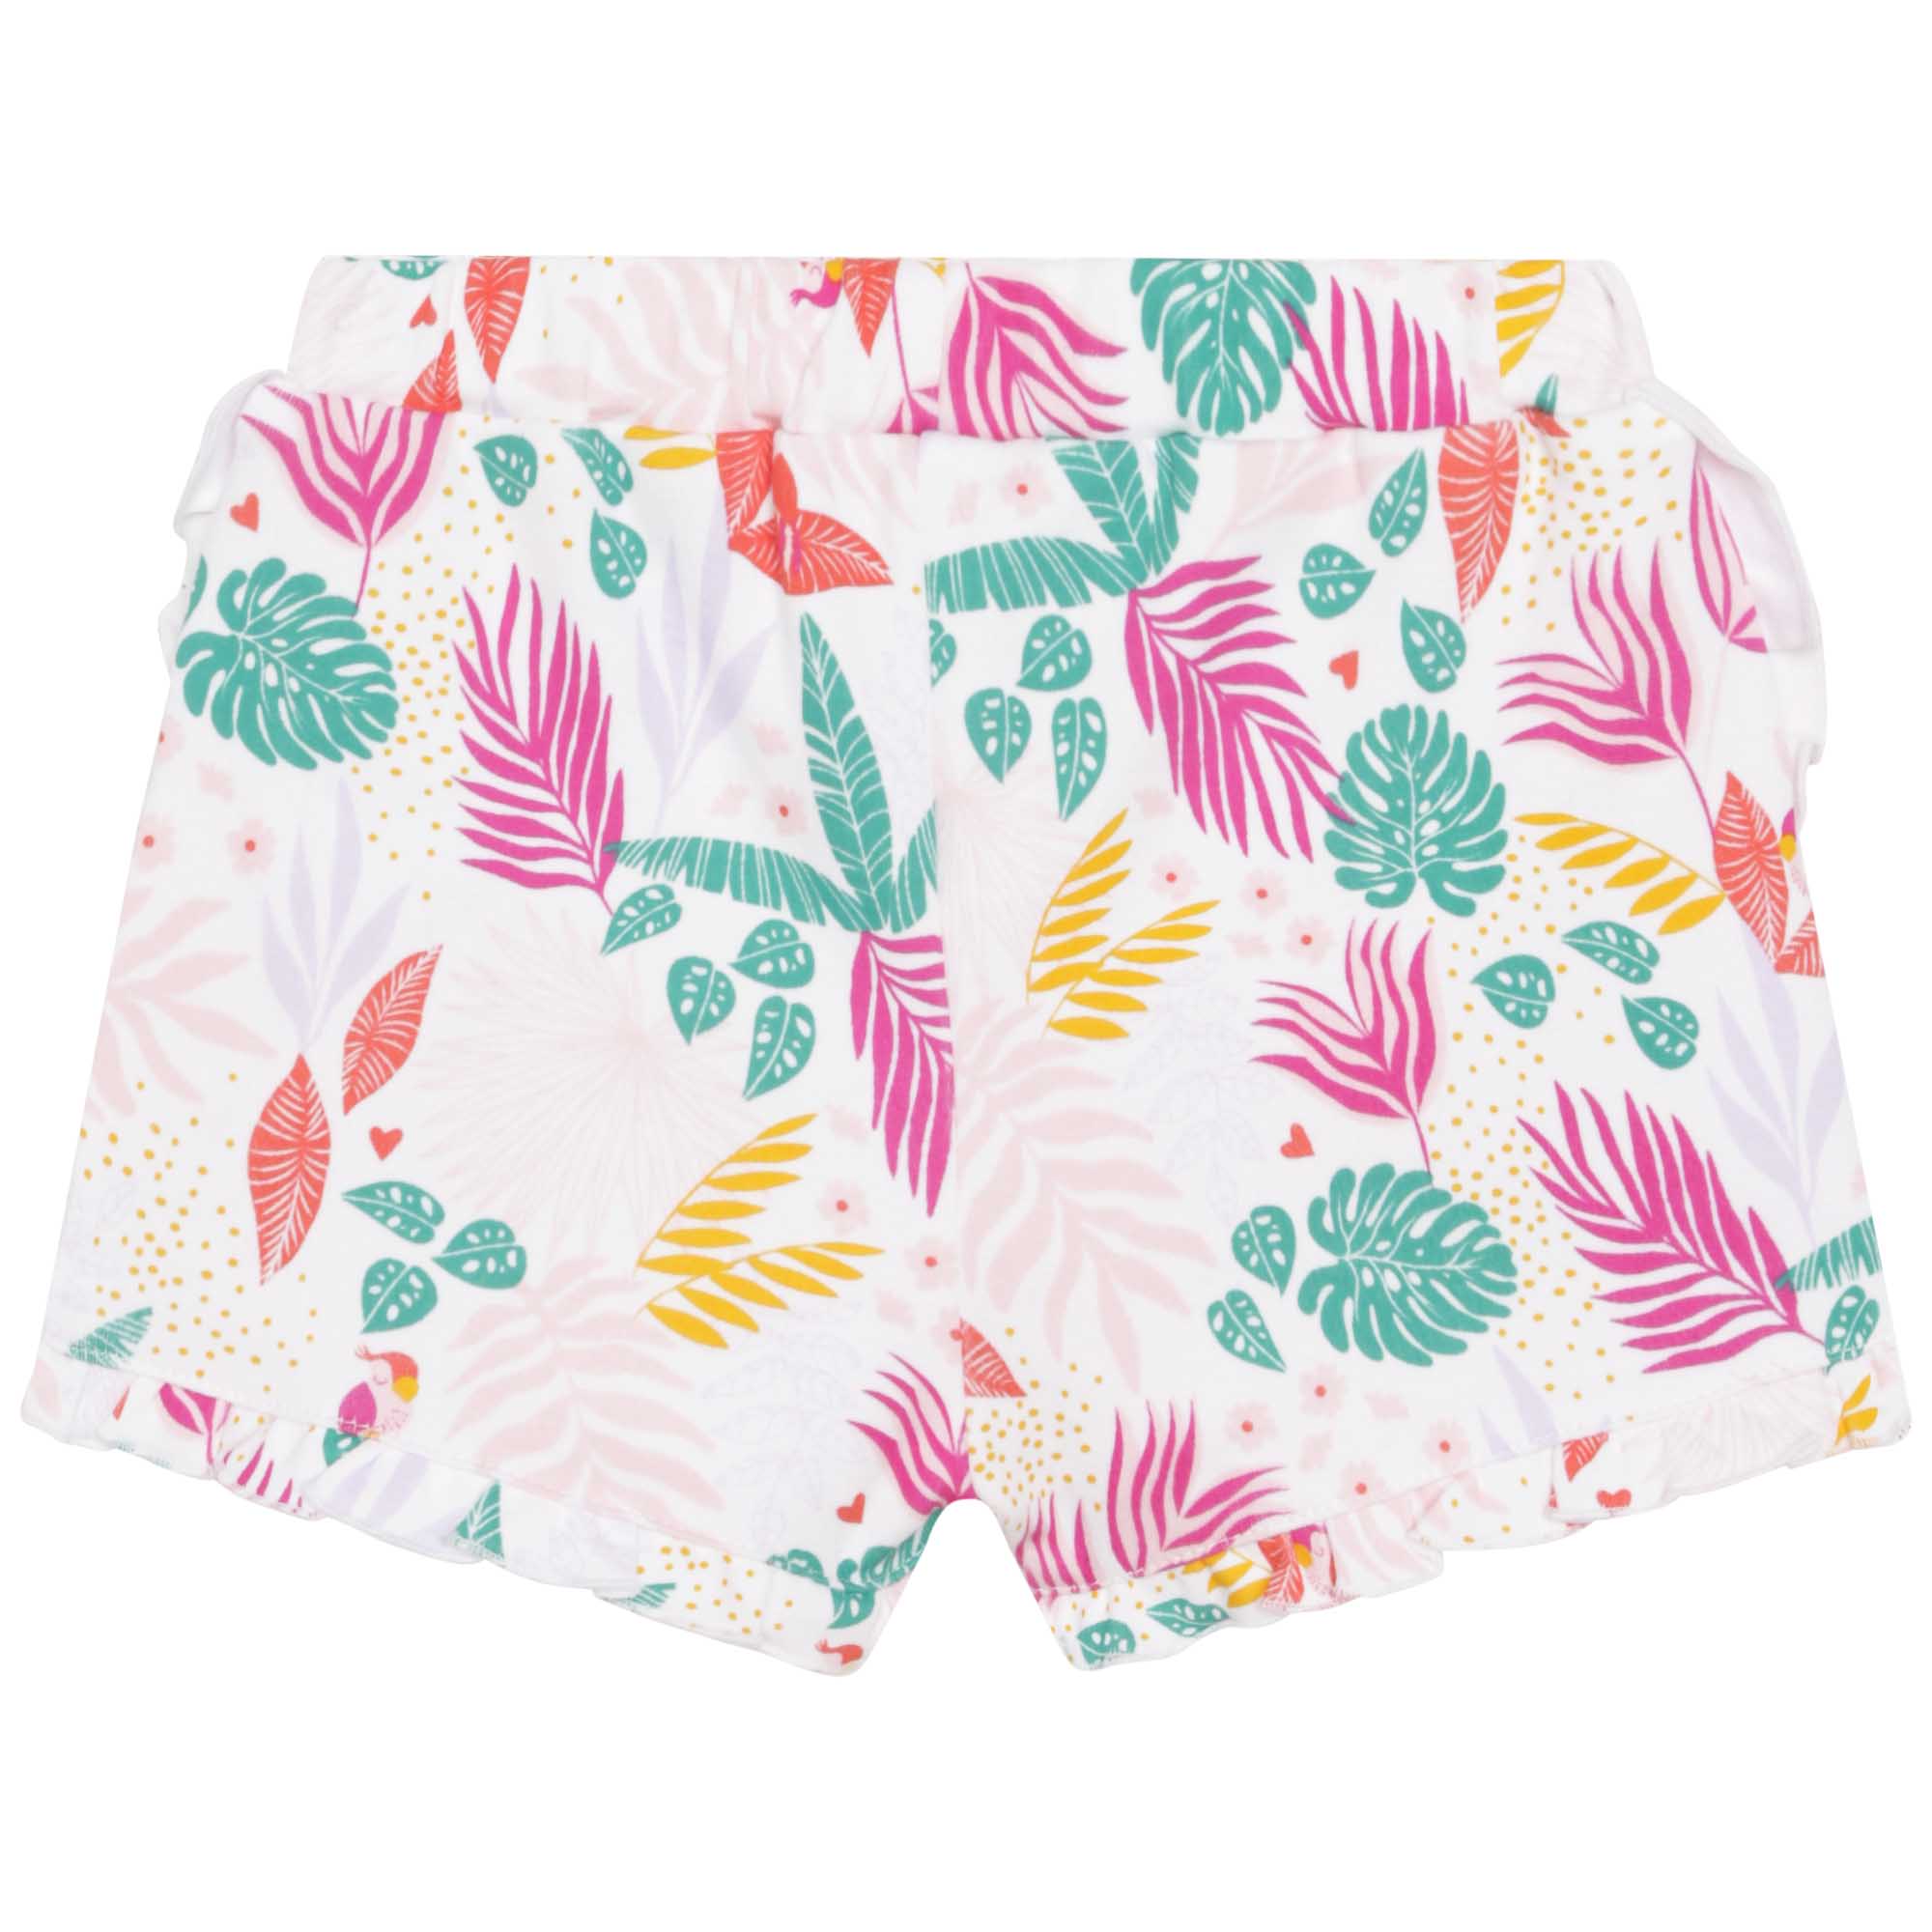 Printed cotton shorts CARREMENT BEAU for GIRL